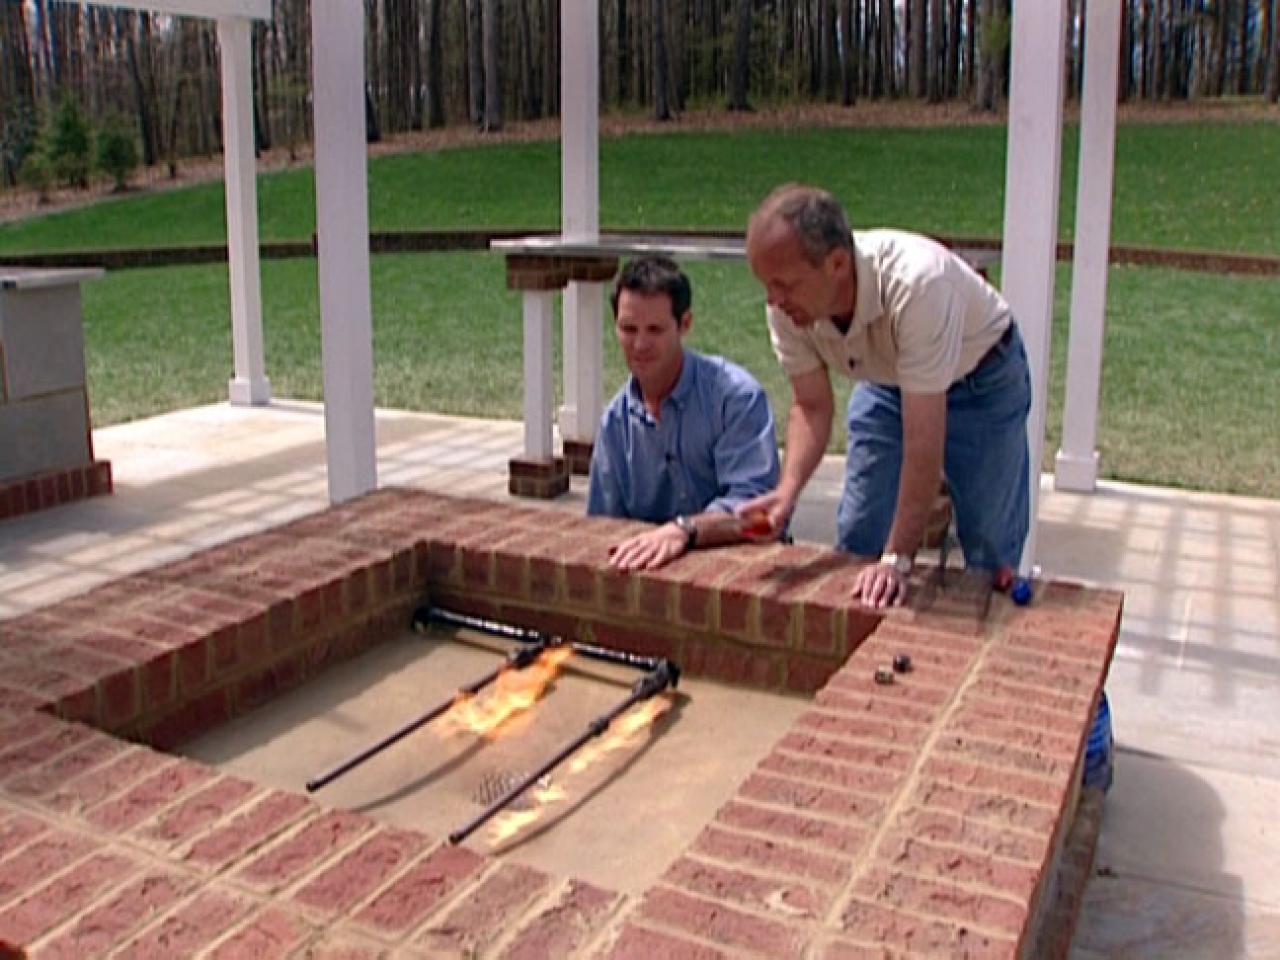 How To Hook Up The Gas For A Fire Pit, How To Make A Gas Fire Pit